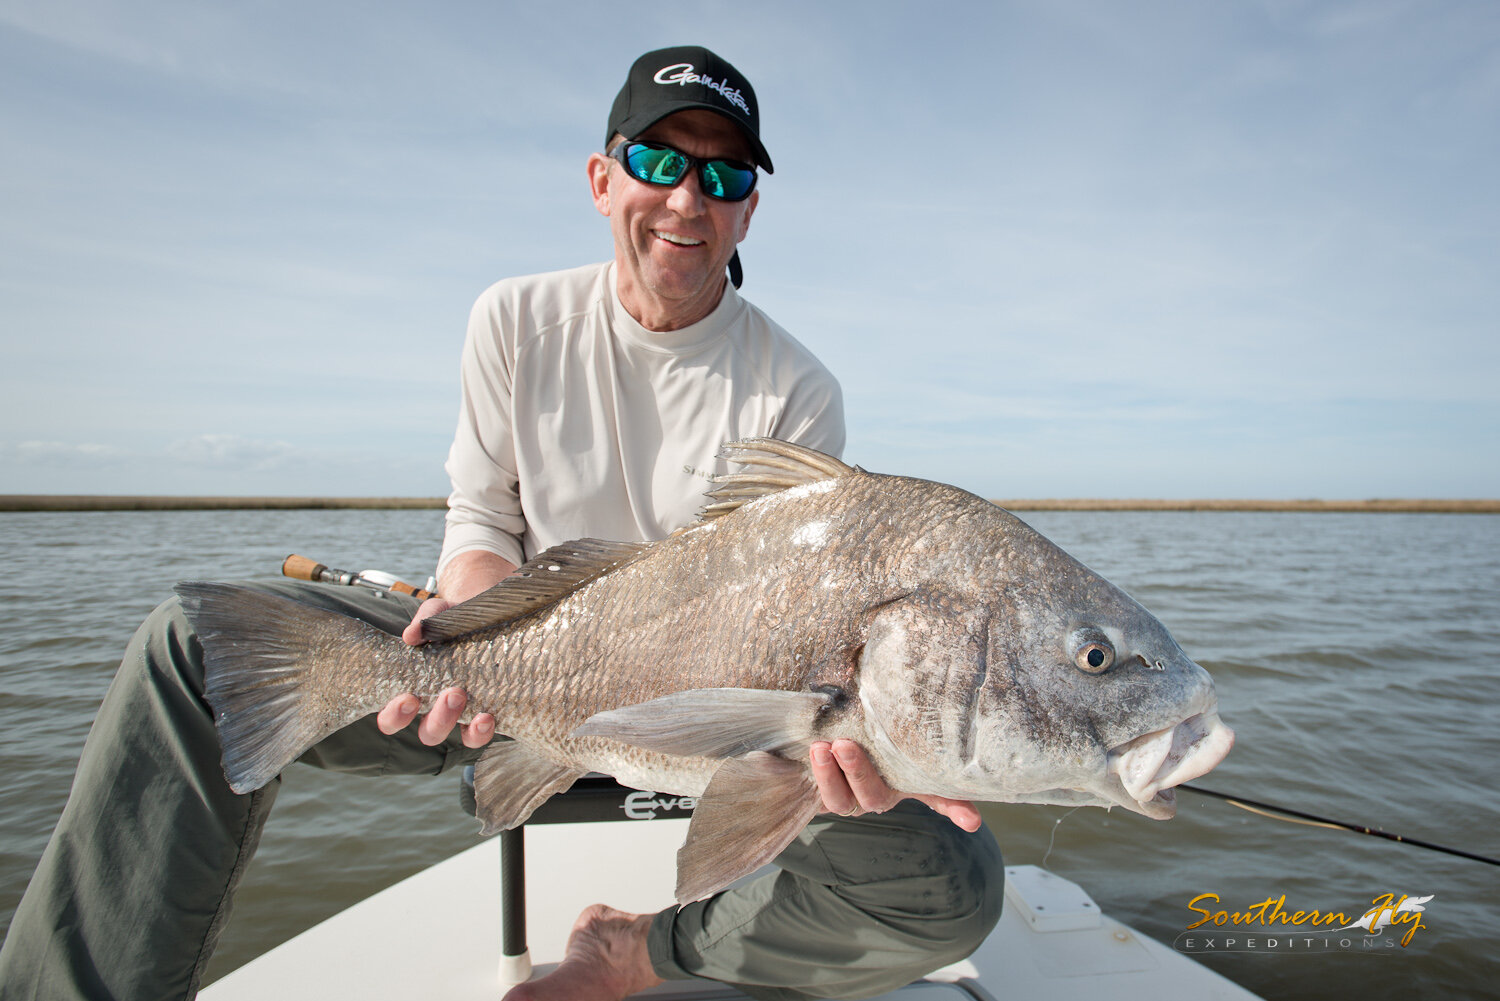 2020-03-12-13_SouthernFlyExpeditions_NewOrleans_DonKlingler-4.jpg